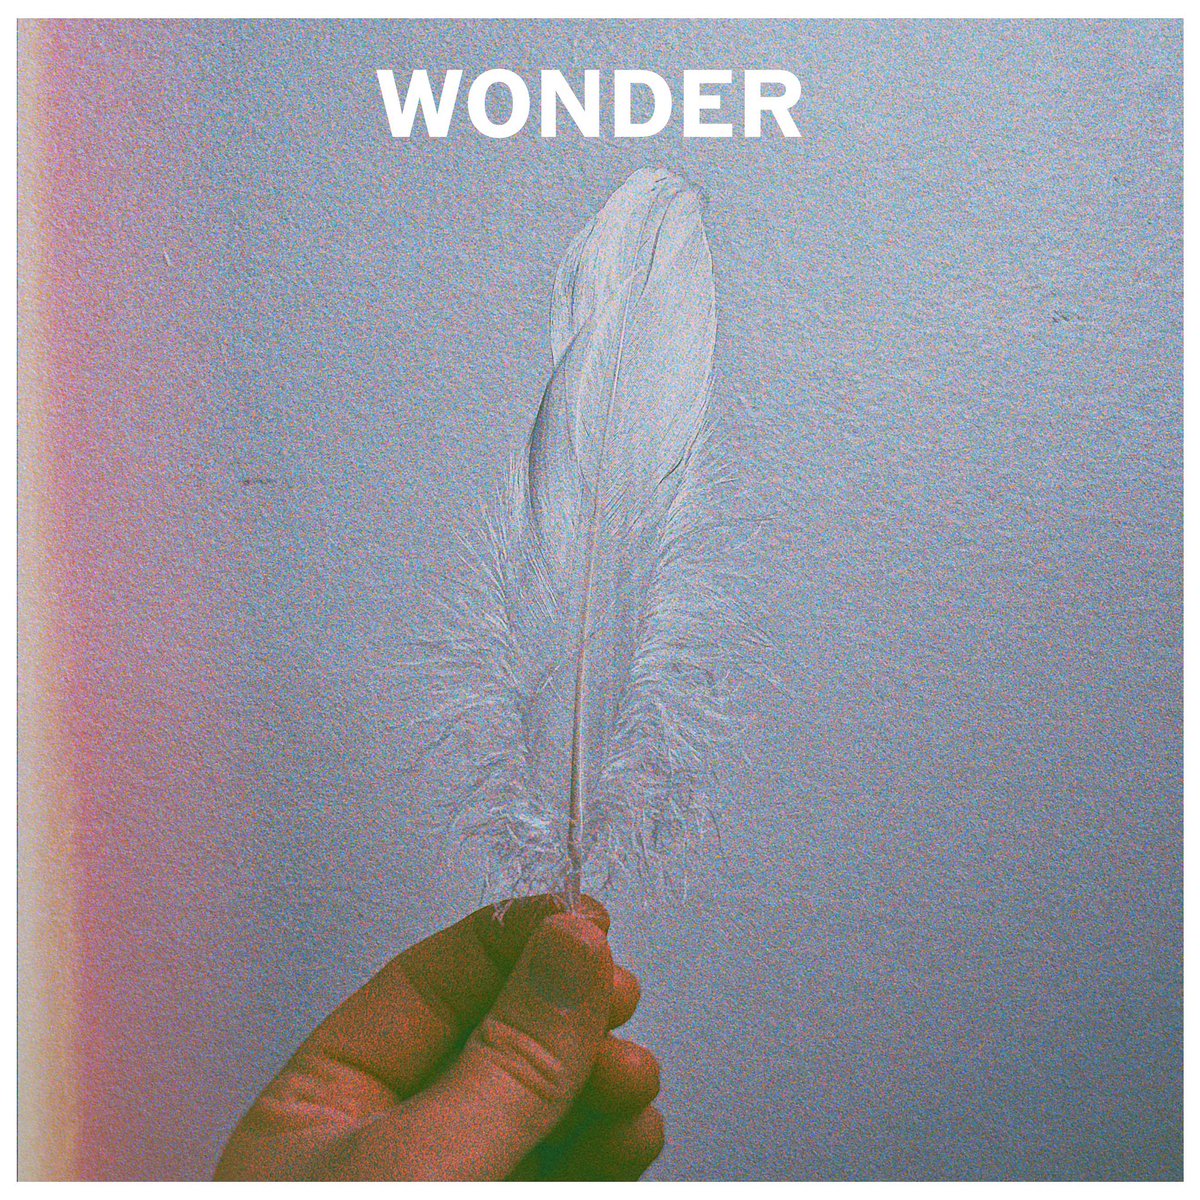 ‘Isn’t it a wonder why it’s pulling us under’ ✨ ‘Wonder Pt.1’ is out on all streaming services now - as I keep saying this song has been a journey in the making. Have a listen and let us know what you think!